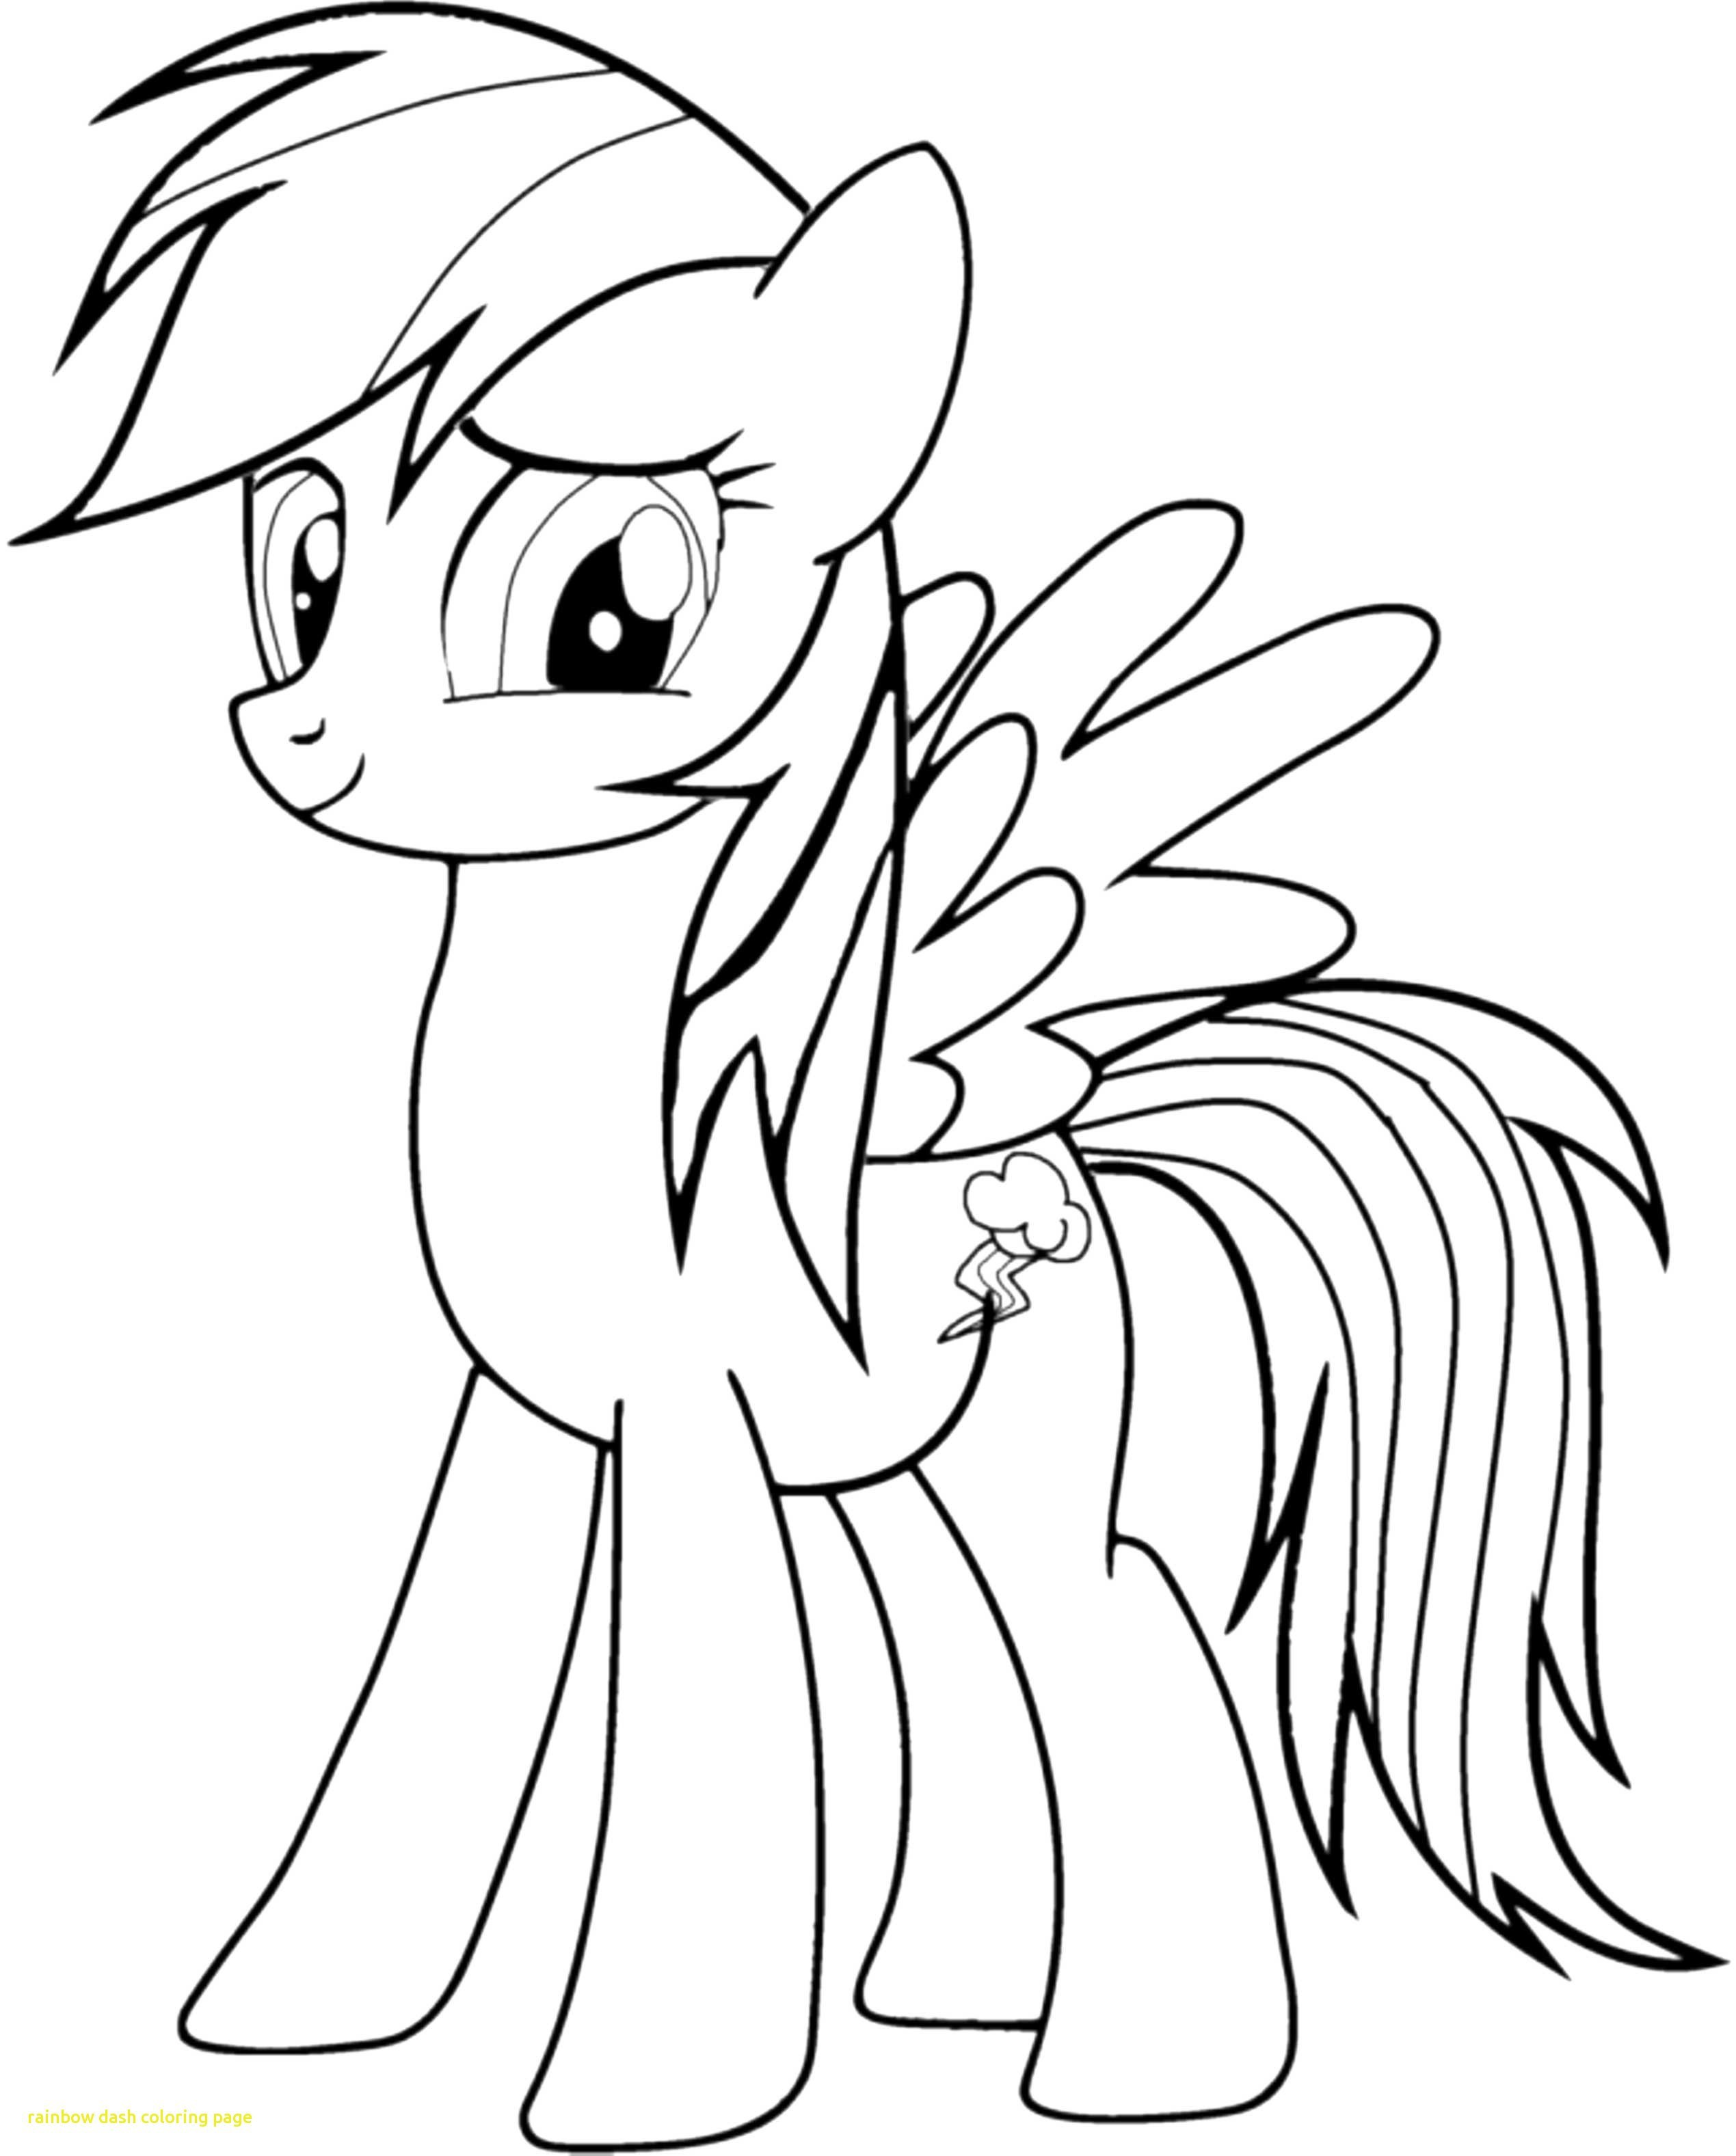 free coloring pages Rainbow Dash Coloring Page With My Little Pony Coloring Pages of